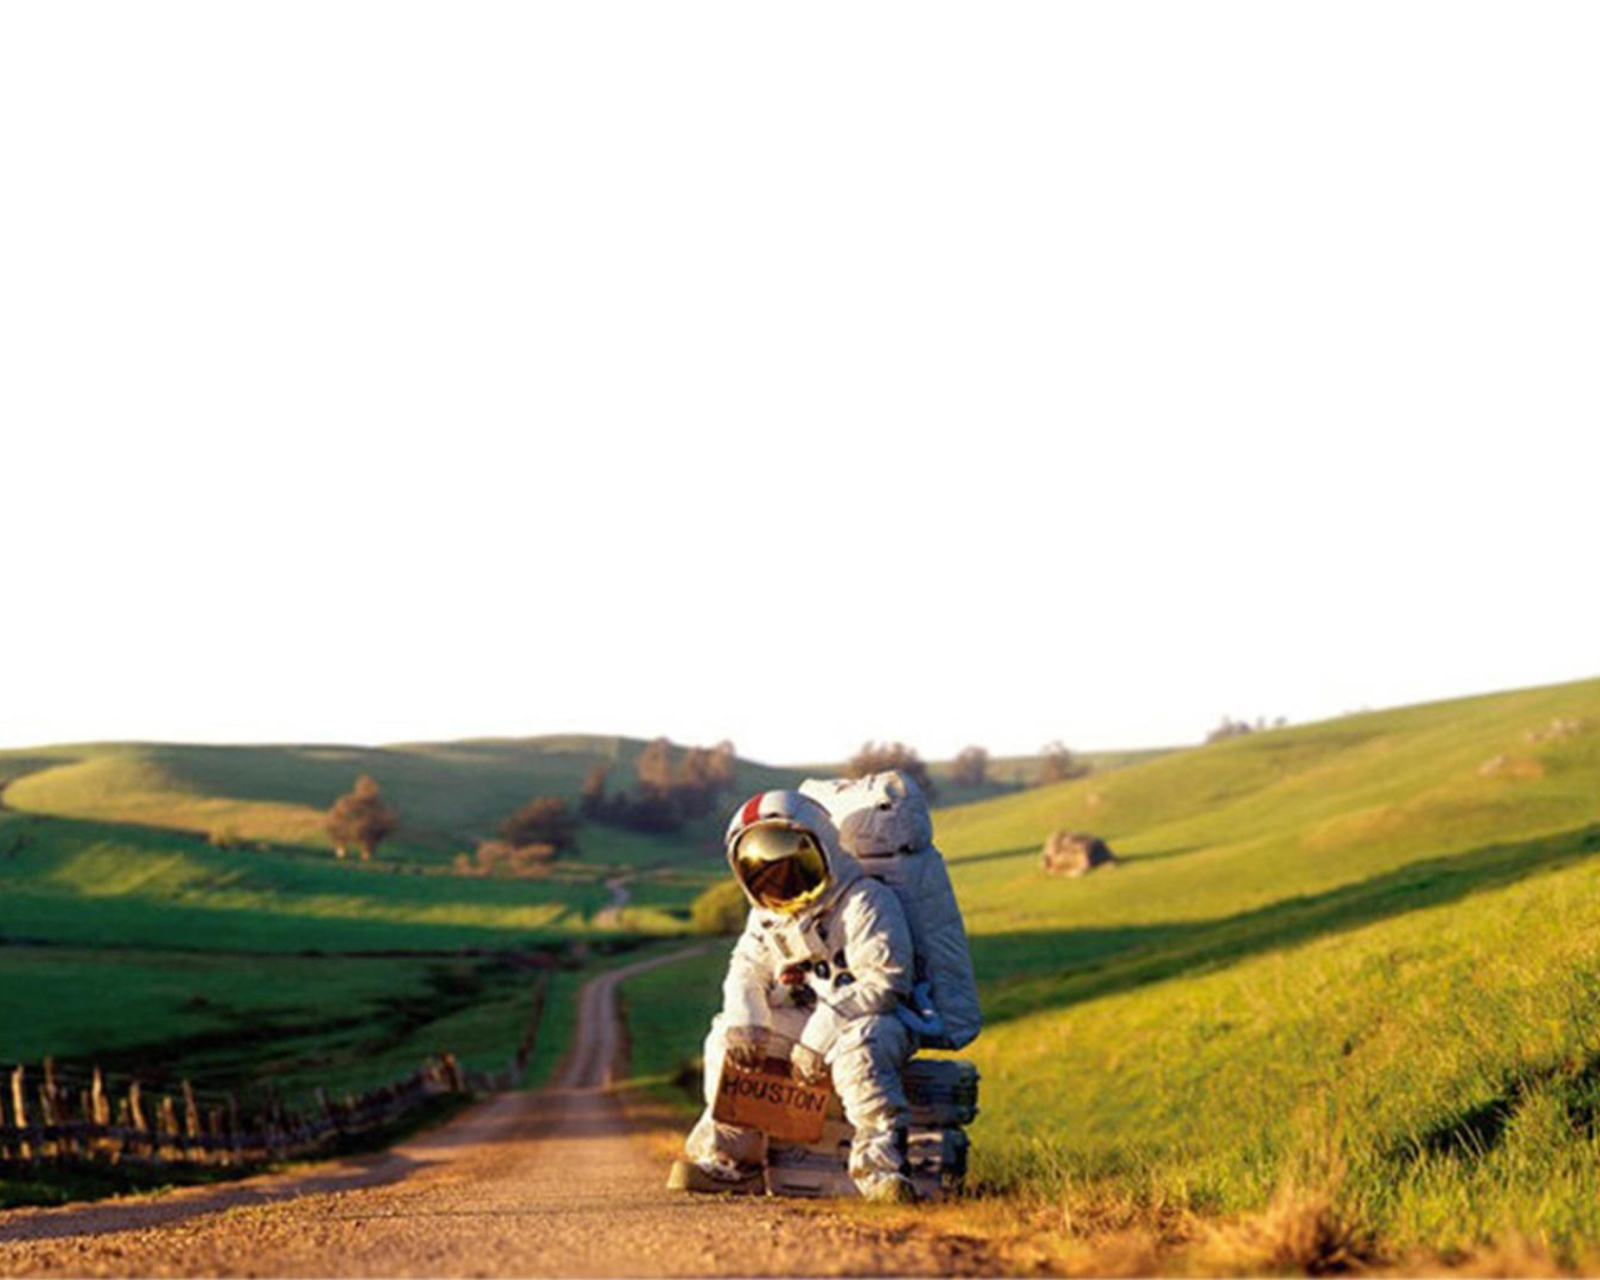 Astronaut On The Road wallpaper 1600x1280